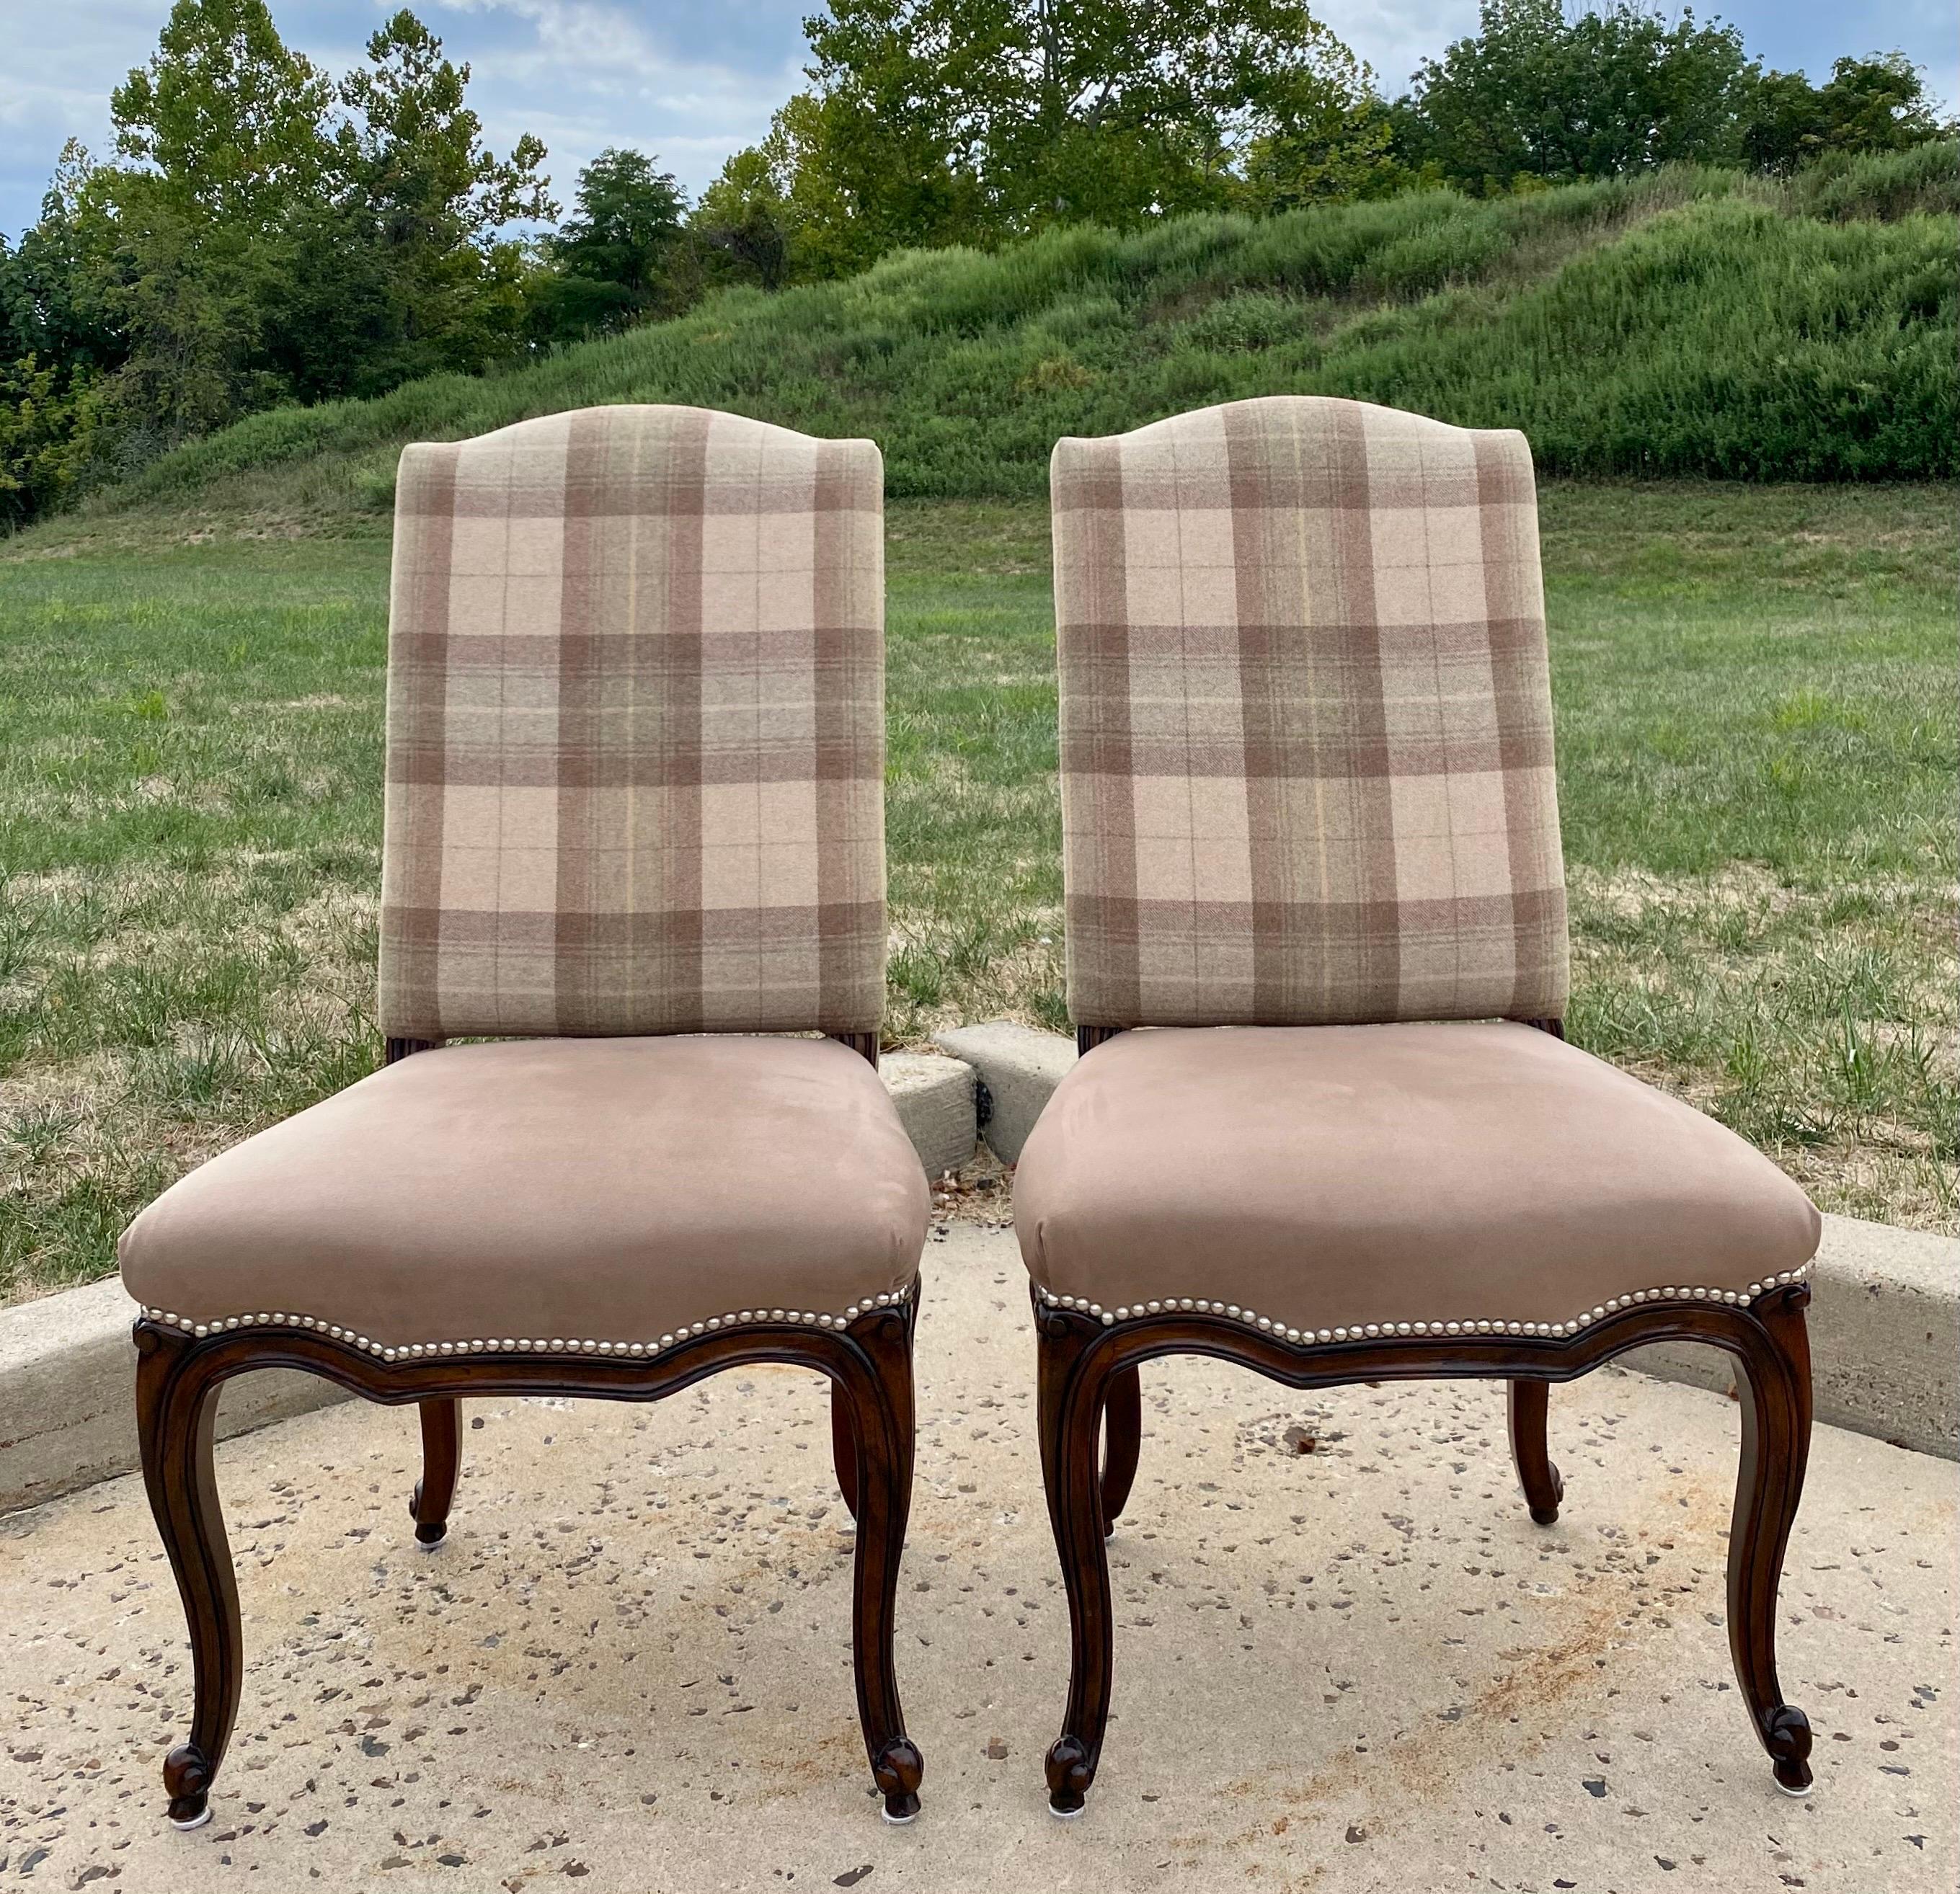 Classic Ralph Lauren Home Nobel Estate dining side chairs. Finely carved solid wood frames feature a Mahogany finish with silver nail head trim detailing and curved cabriole legs. Wool plaid upholstered backs and fronts with Ultrasuede seats. These